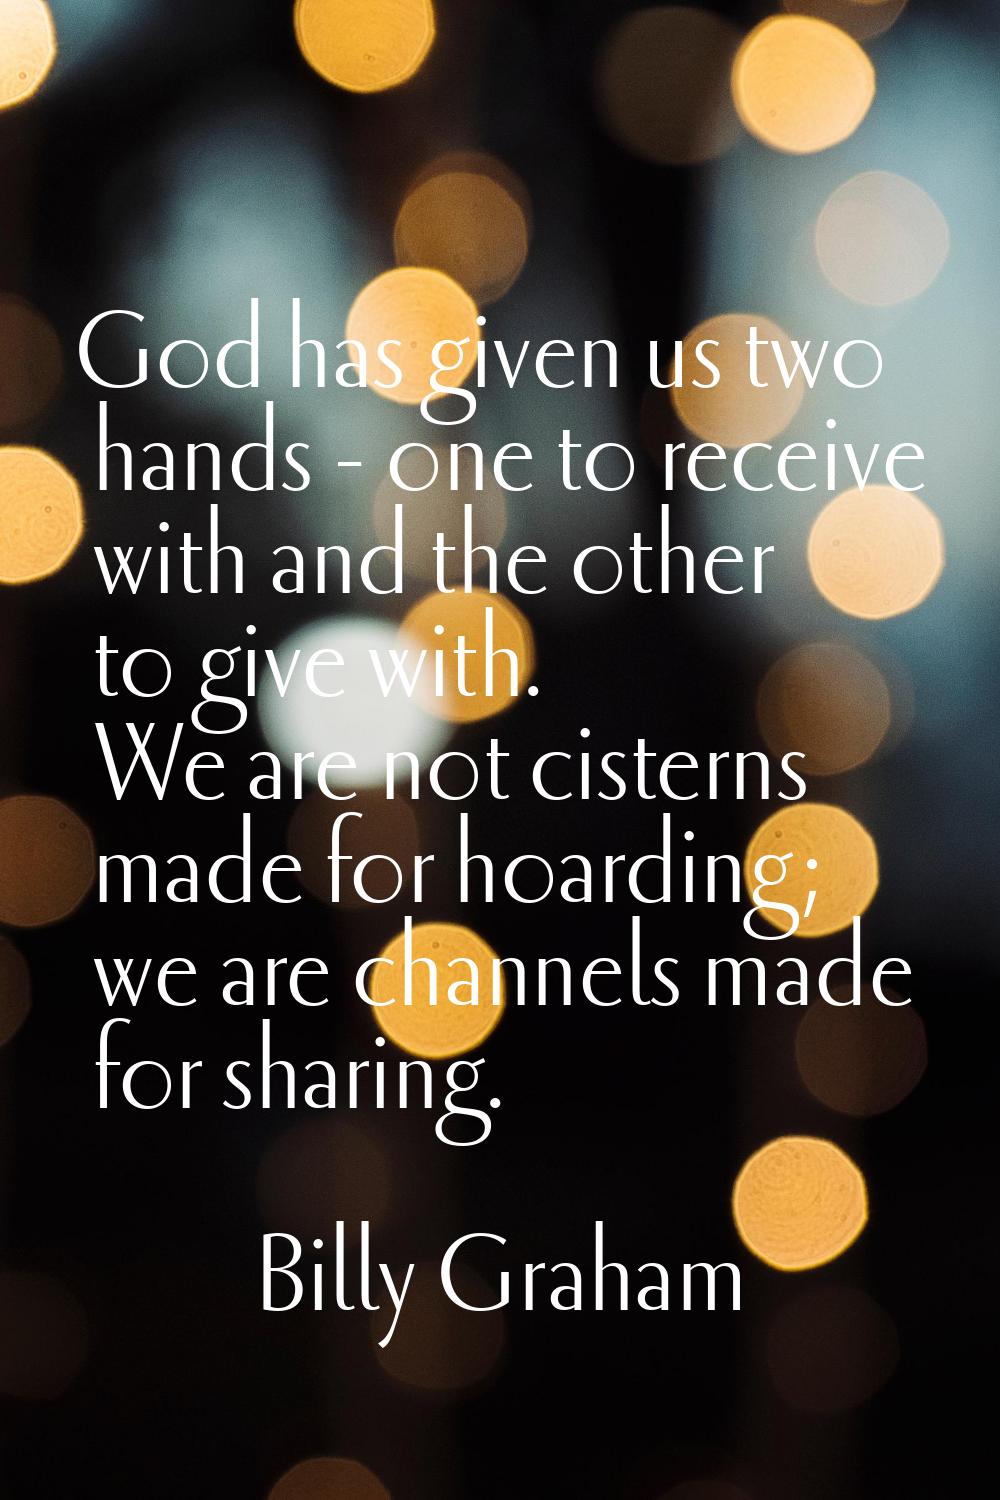 God has given us two hands - one to receive with and the other to give with. We are not cisterns ma